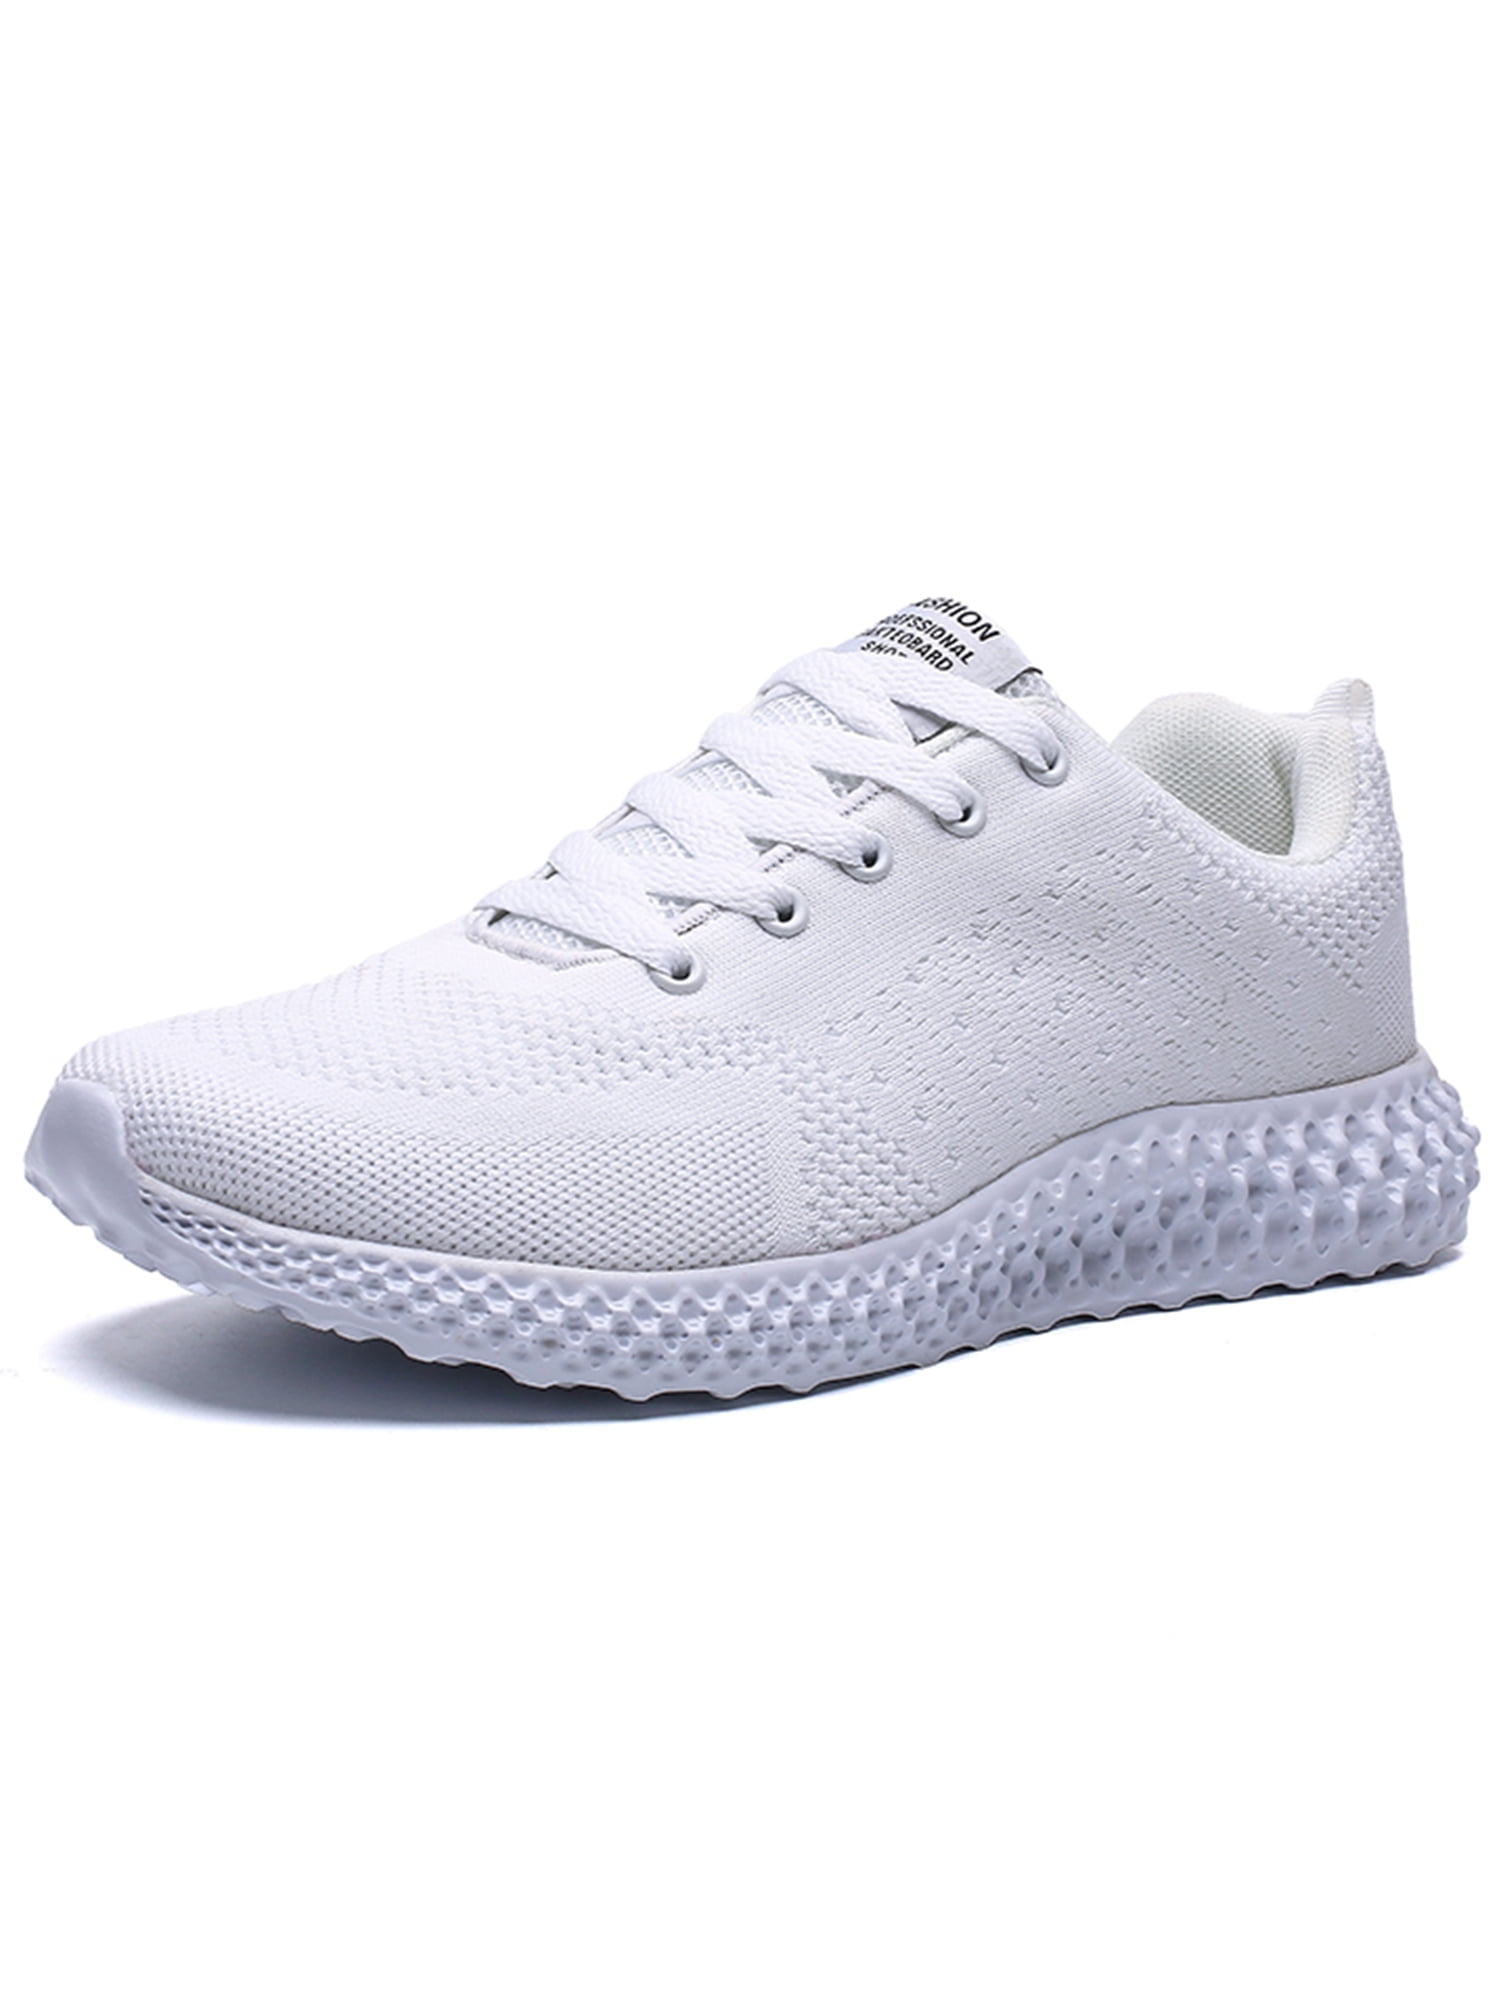 Mens Casual Athletic Sneakers Knit Running Shoes Tennis Shoe Baseball Jogging